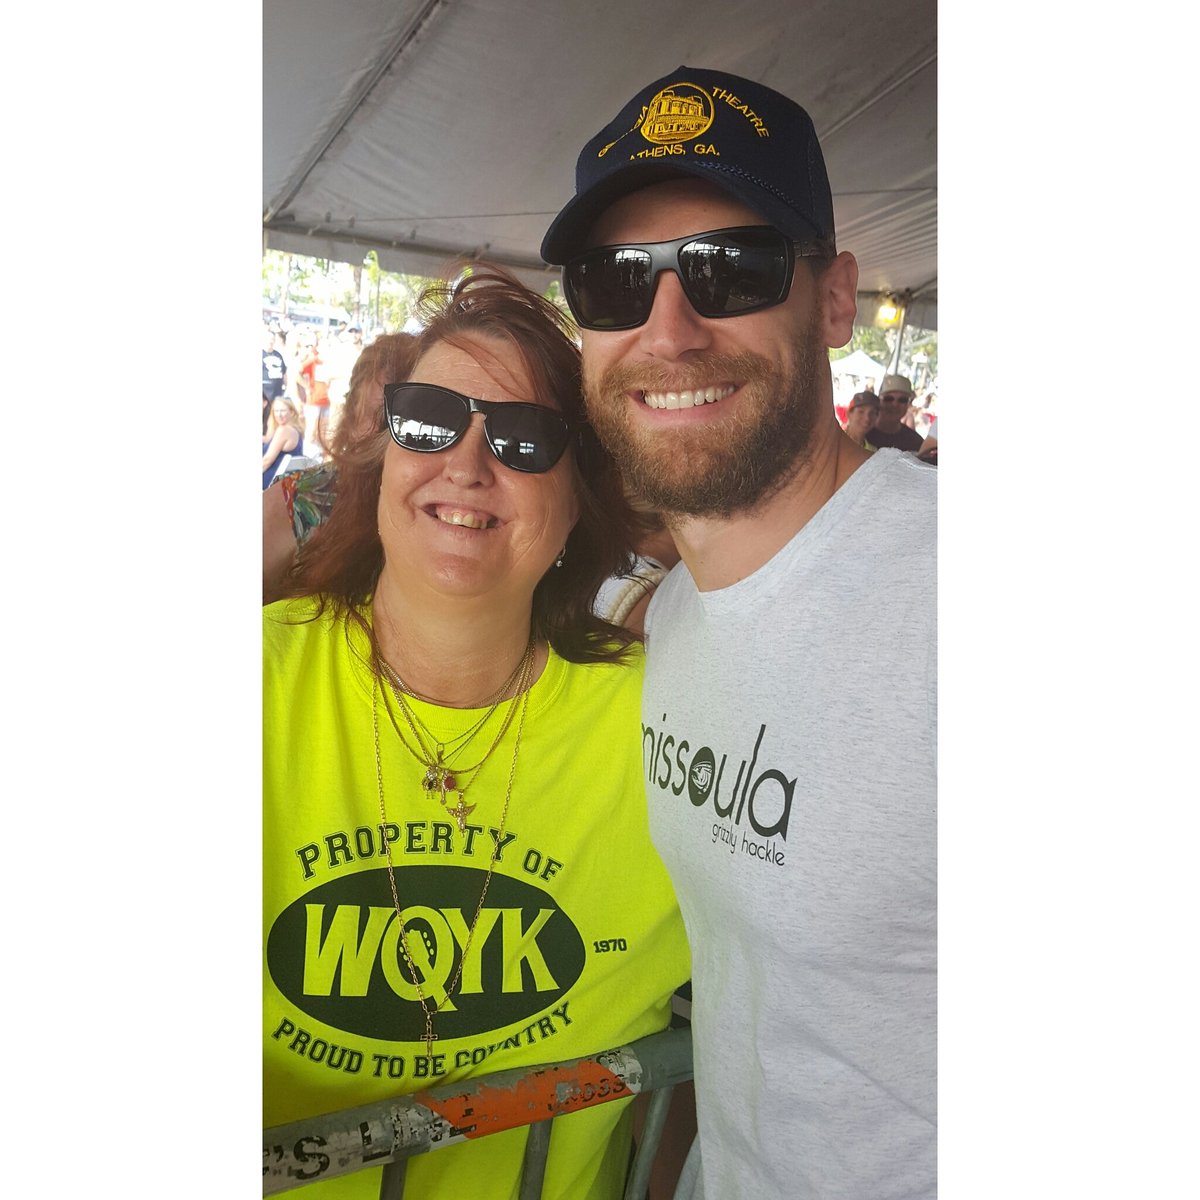 Met @ChaseRiceMusic at the #FunNCountry concert with @995QYK and made my day!!!!